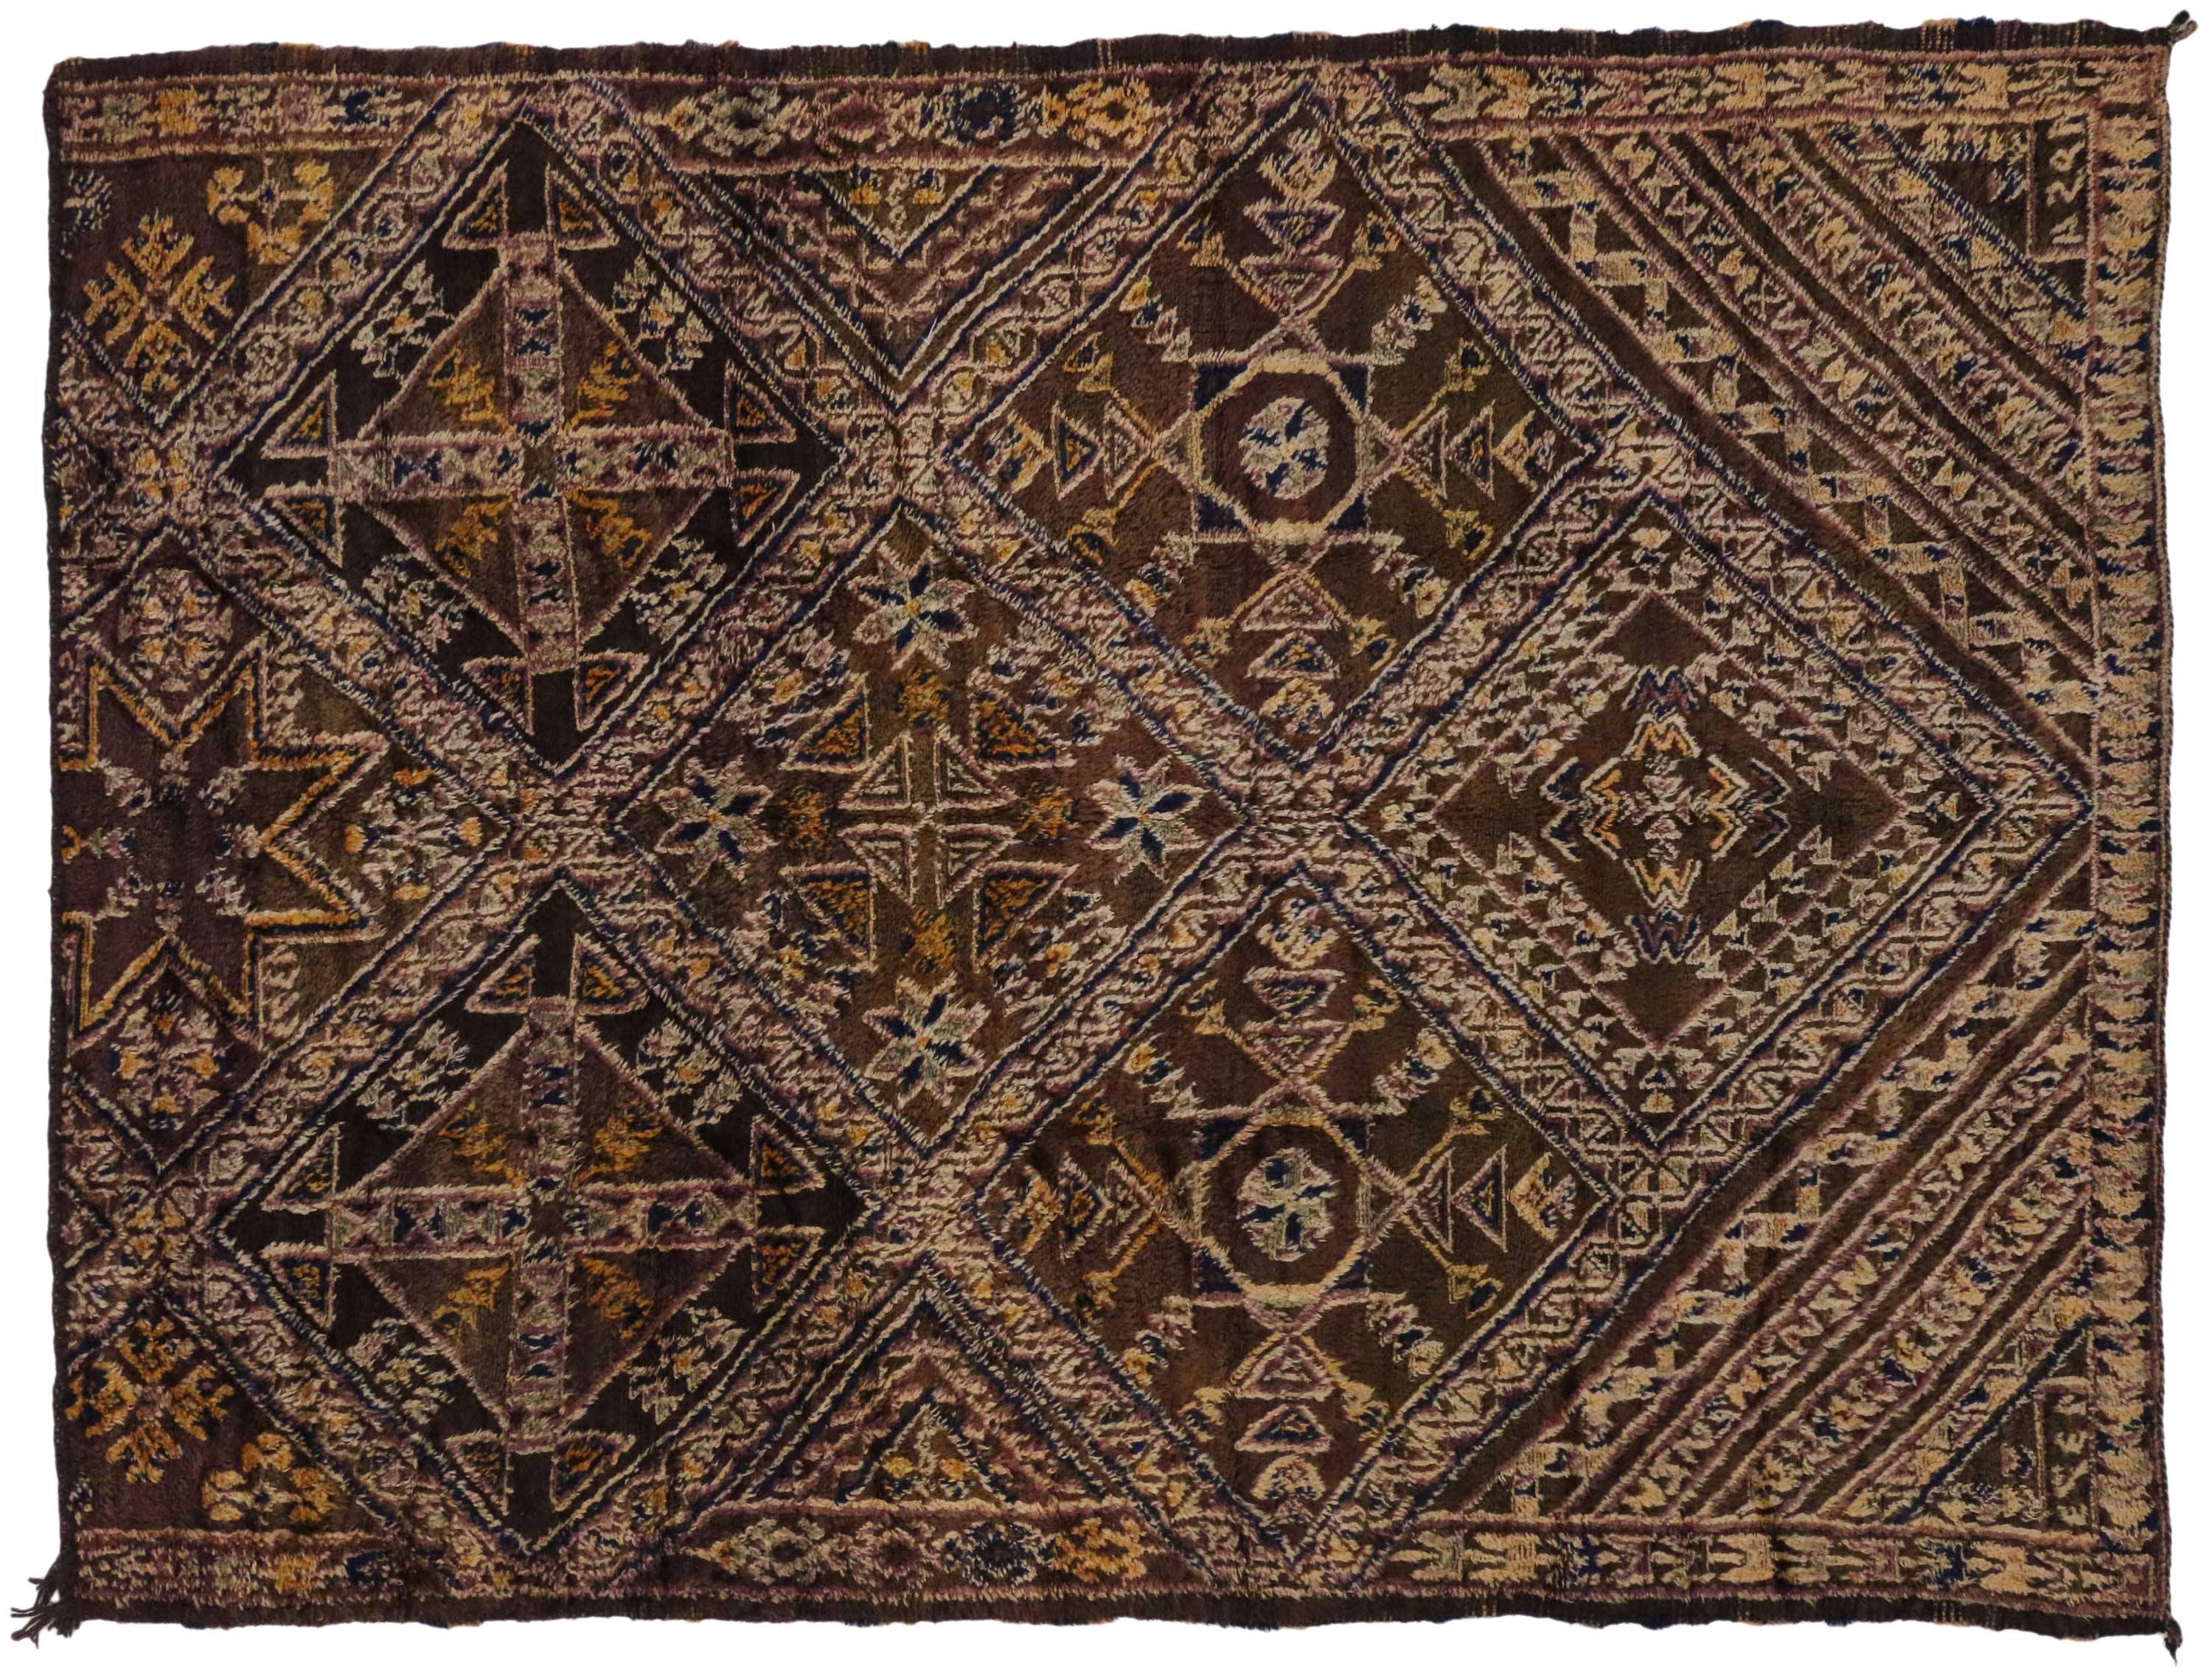 20th Century Vintage Chocolate Beni M'Guild Moroccan Rug with Biophilic Design Tribal Style